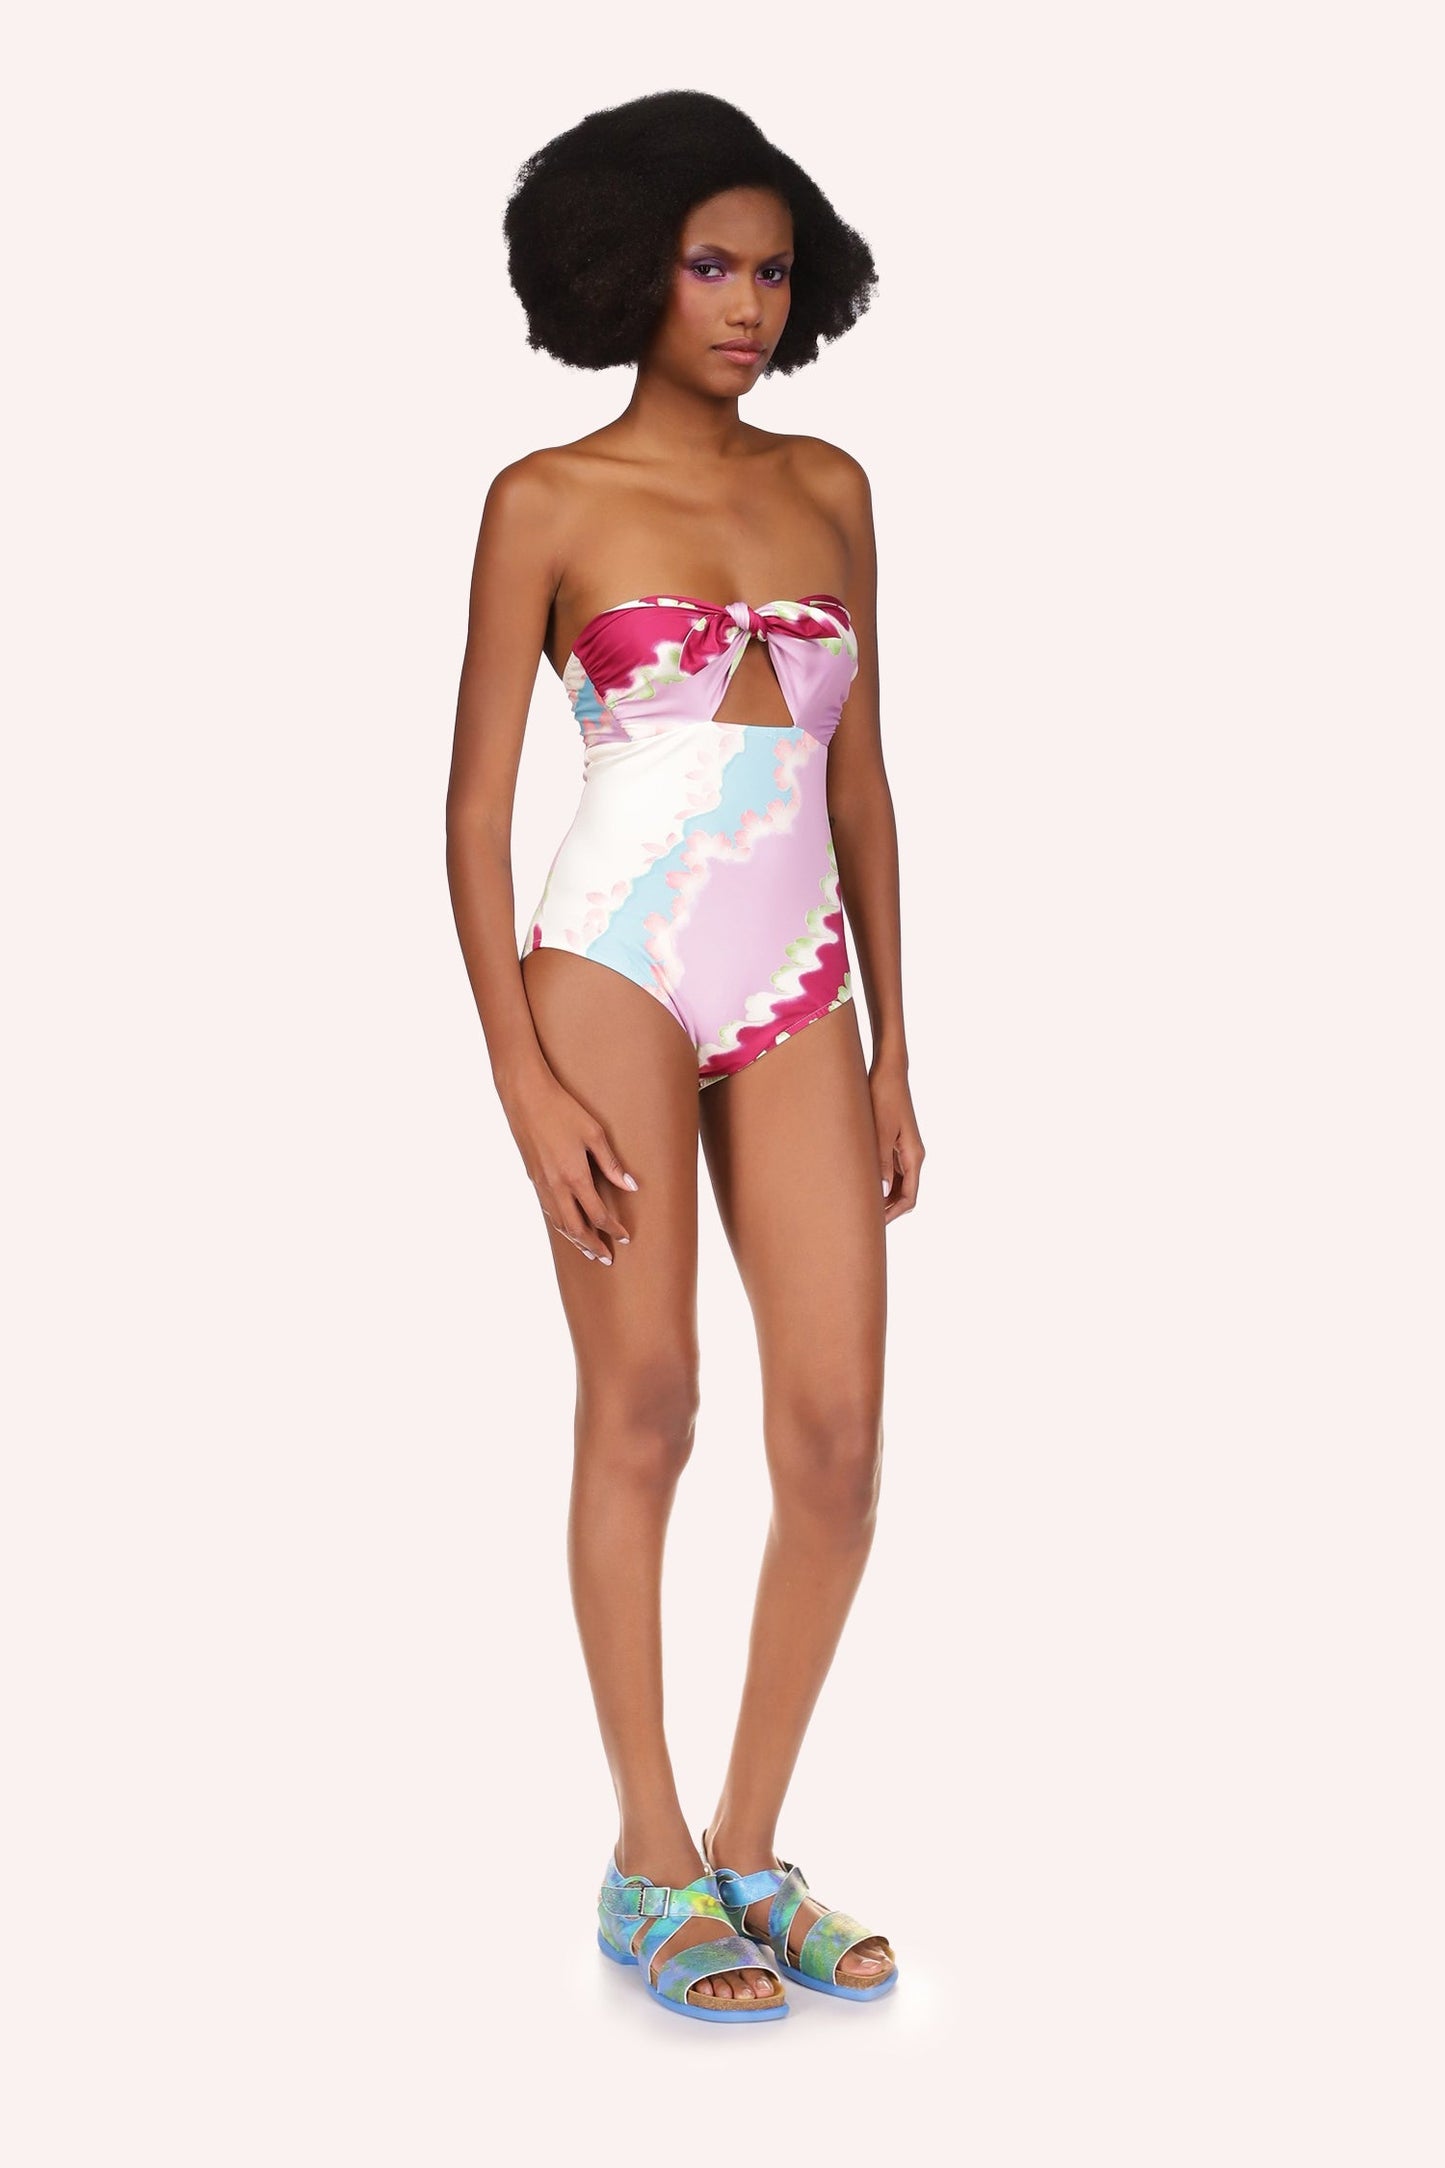 In a stretch fabric, full Bathing Suit wavy lines cloudy design in red, white, pink, and blue